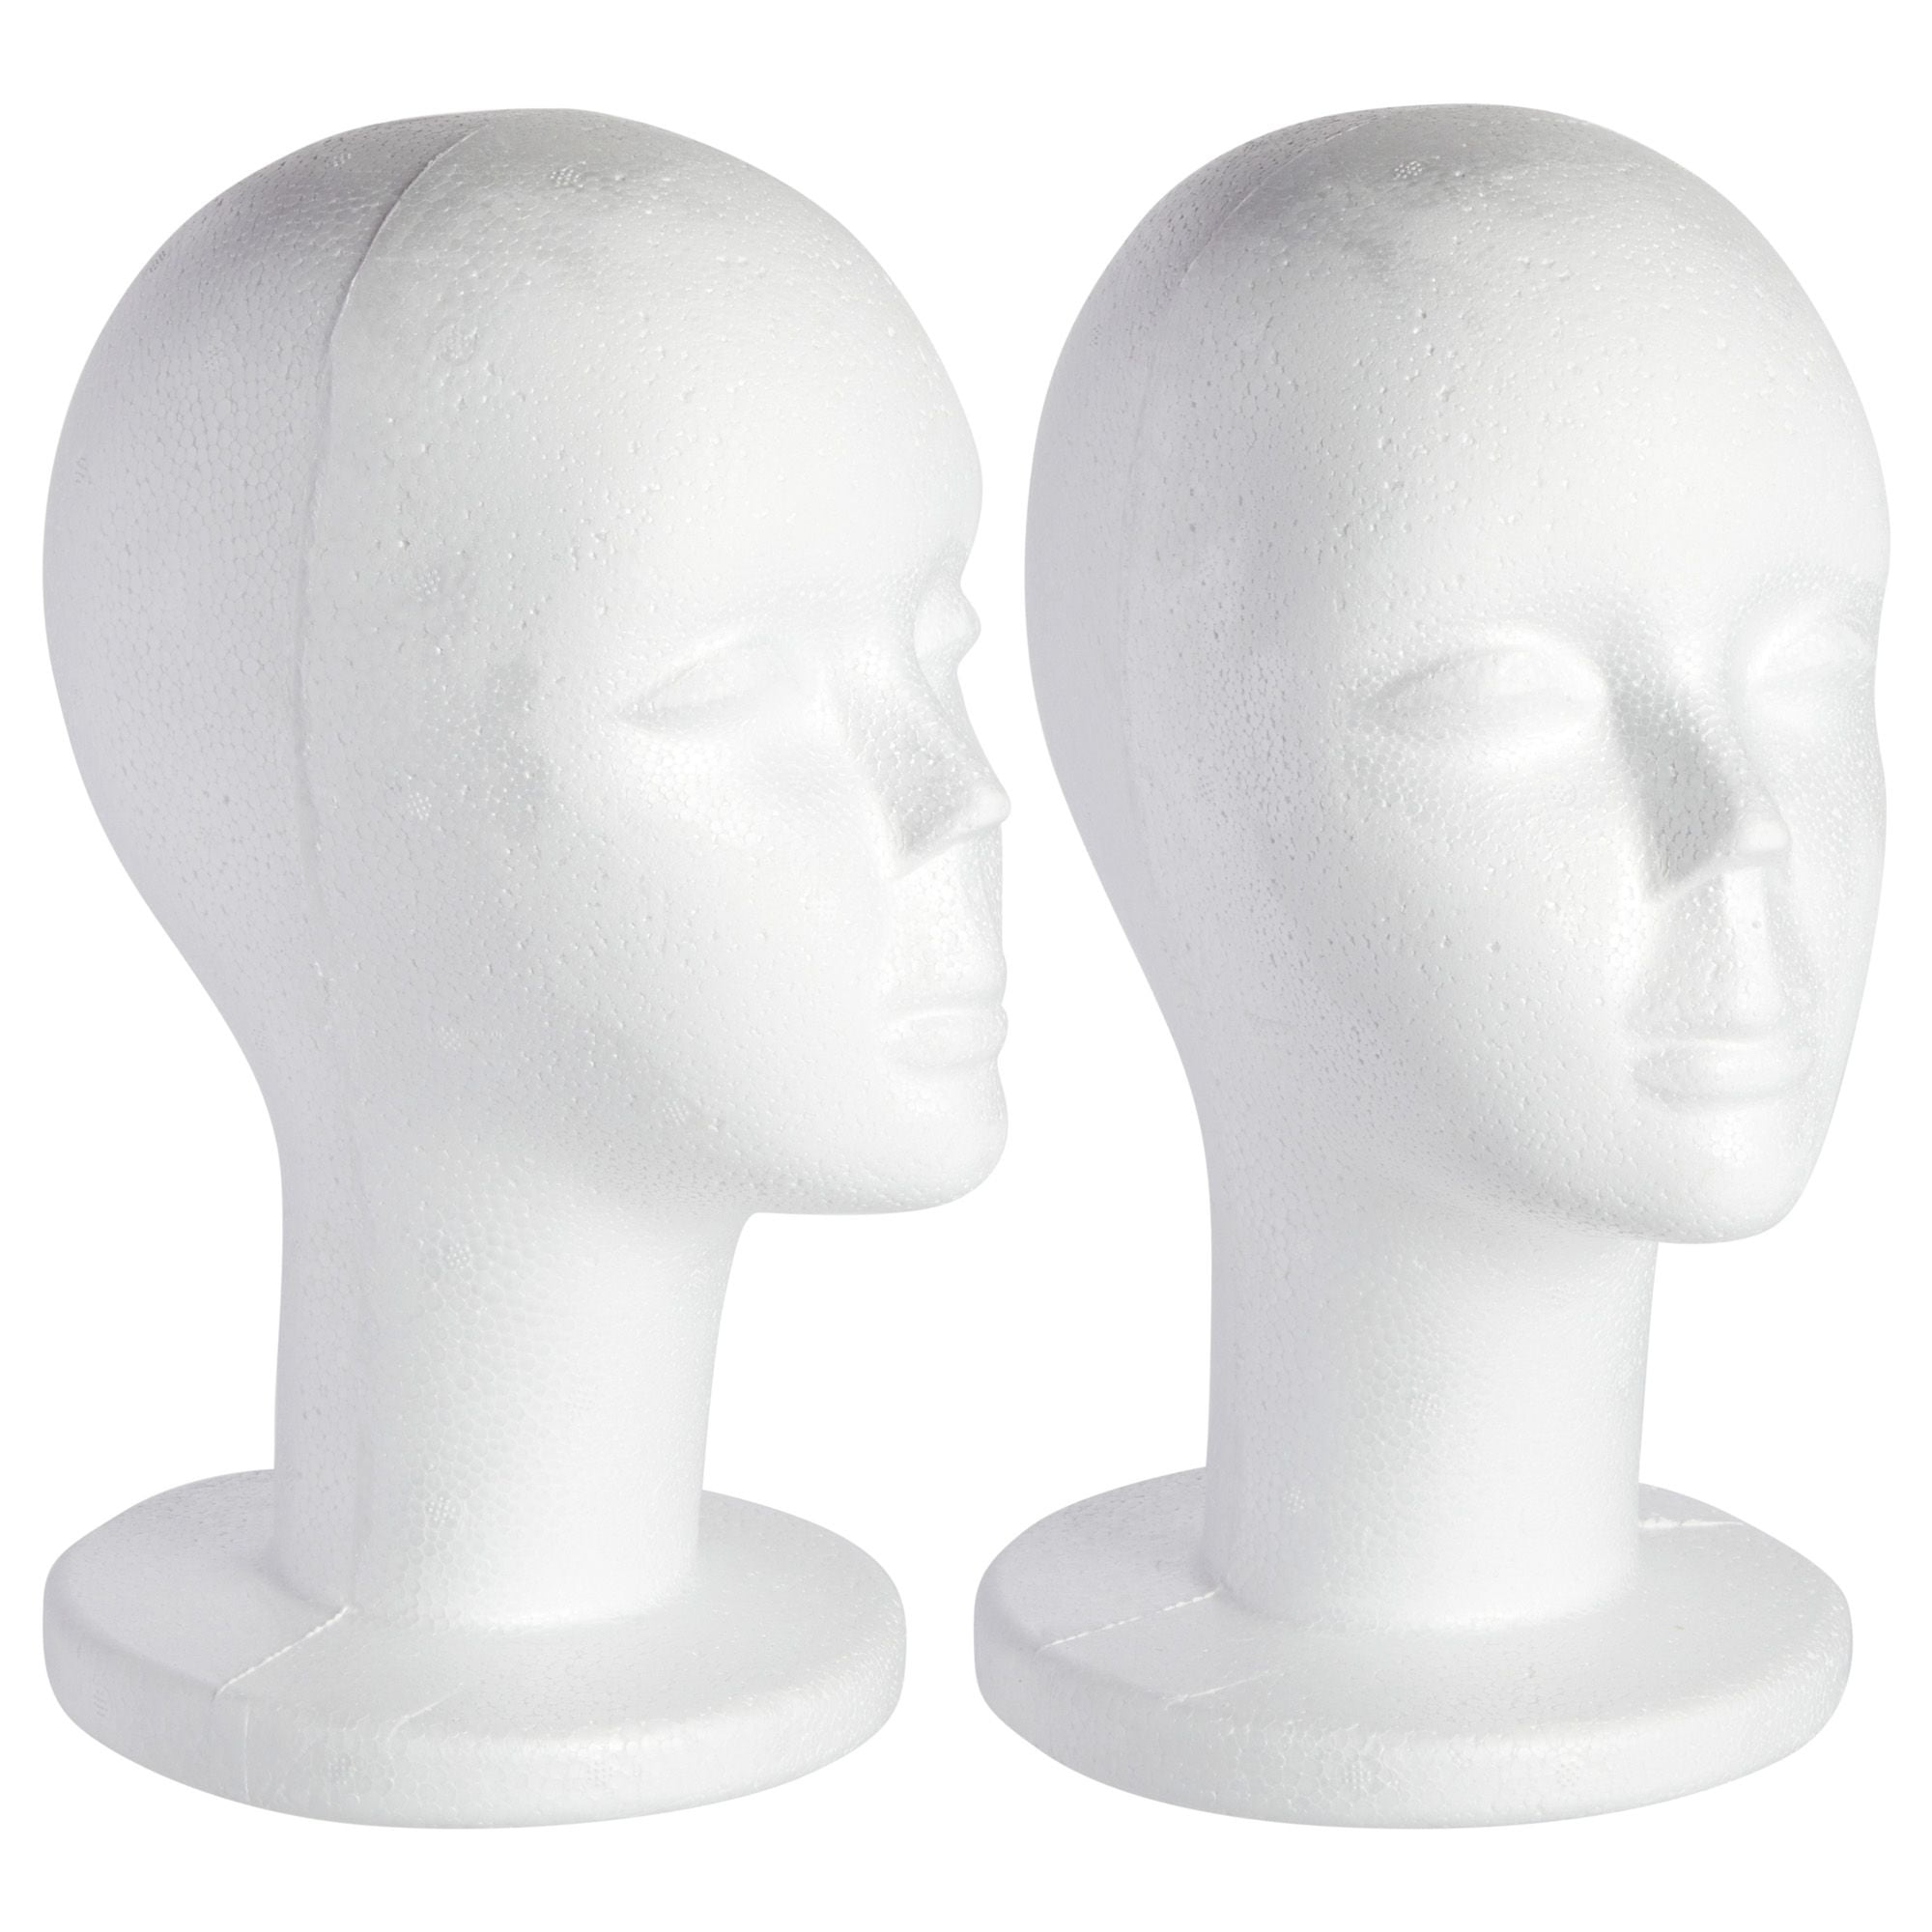 Walbest 11 Foam Wig Head, Tall Female Foam Mannequin Wig Stand and Holder  for Style, Model And Display Hair, Hats and Hairpieces , Mask - for Home,  Salon 